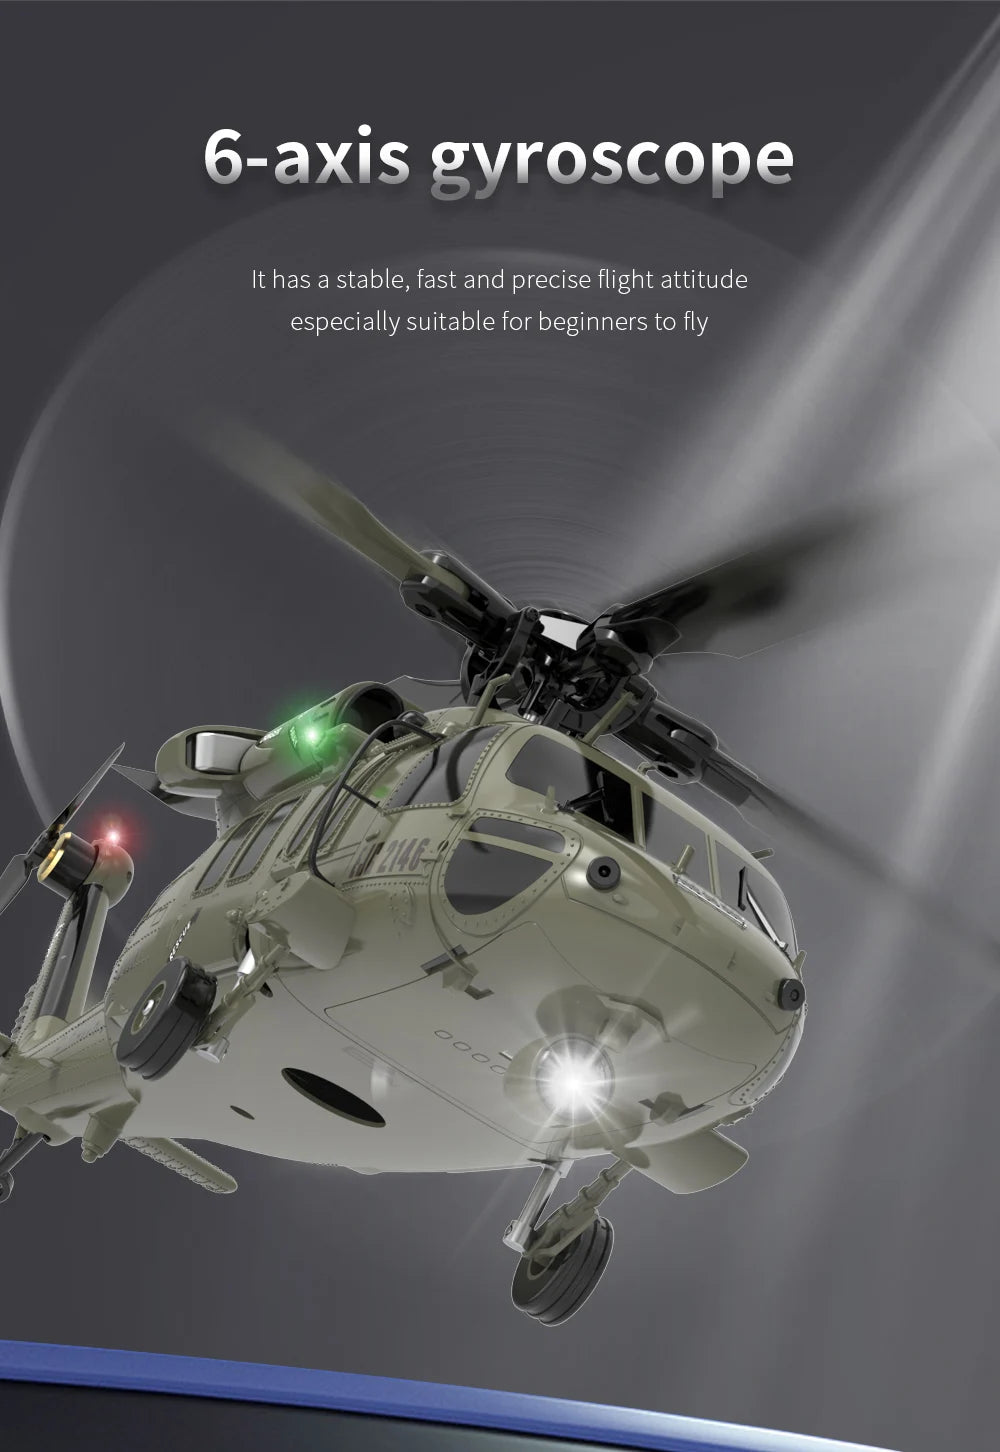 F09 RC Helicopter, 6-axis gyroscope has a stable, fast and precise flight attitude